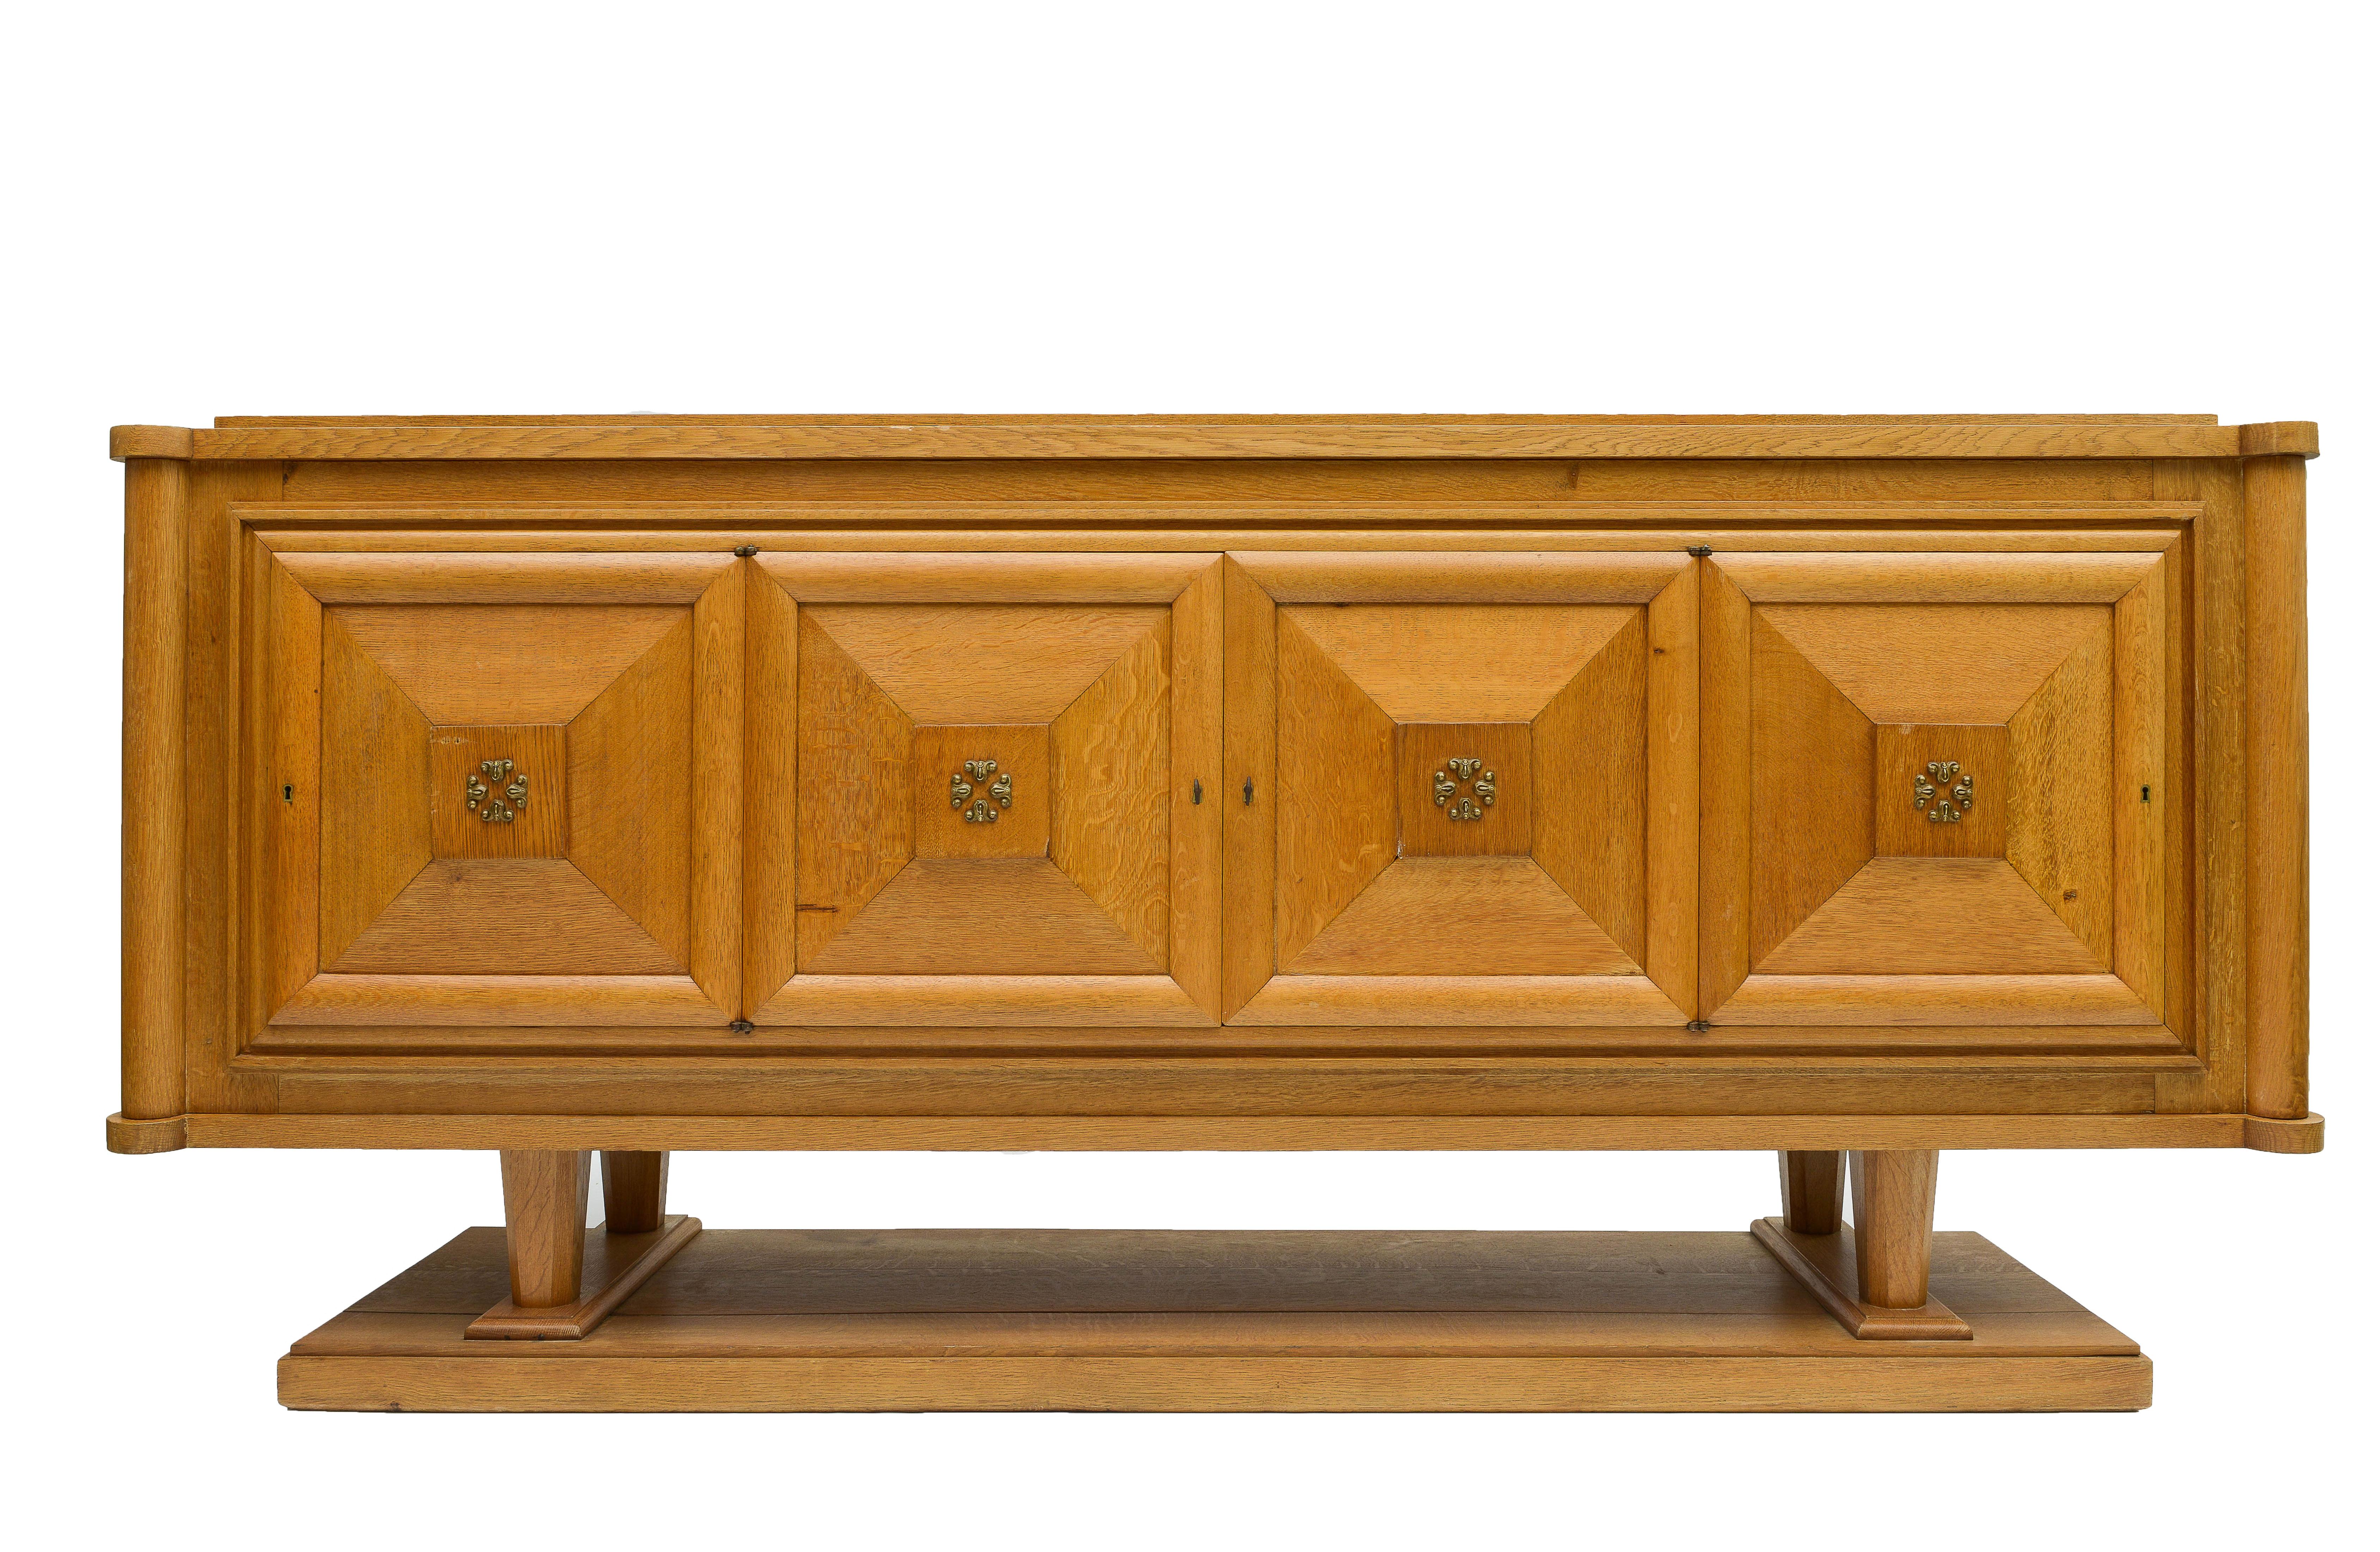 Beautiful French Art Deco sideboard. Incredible condition and lovely grain on the wood. Solid oak with lovely detailing throughout. Brass detailing on the doors.